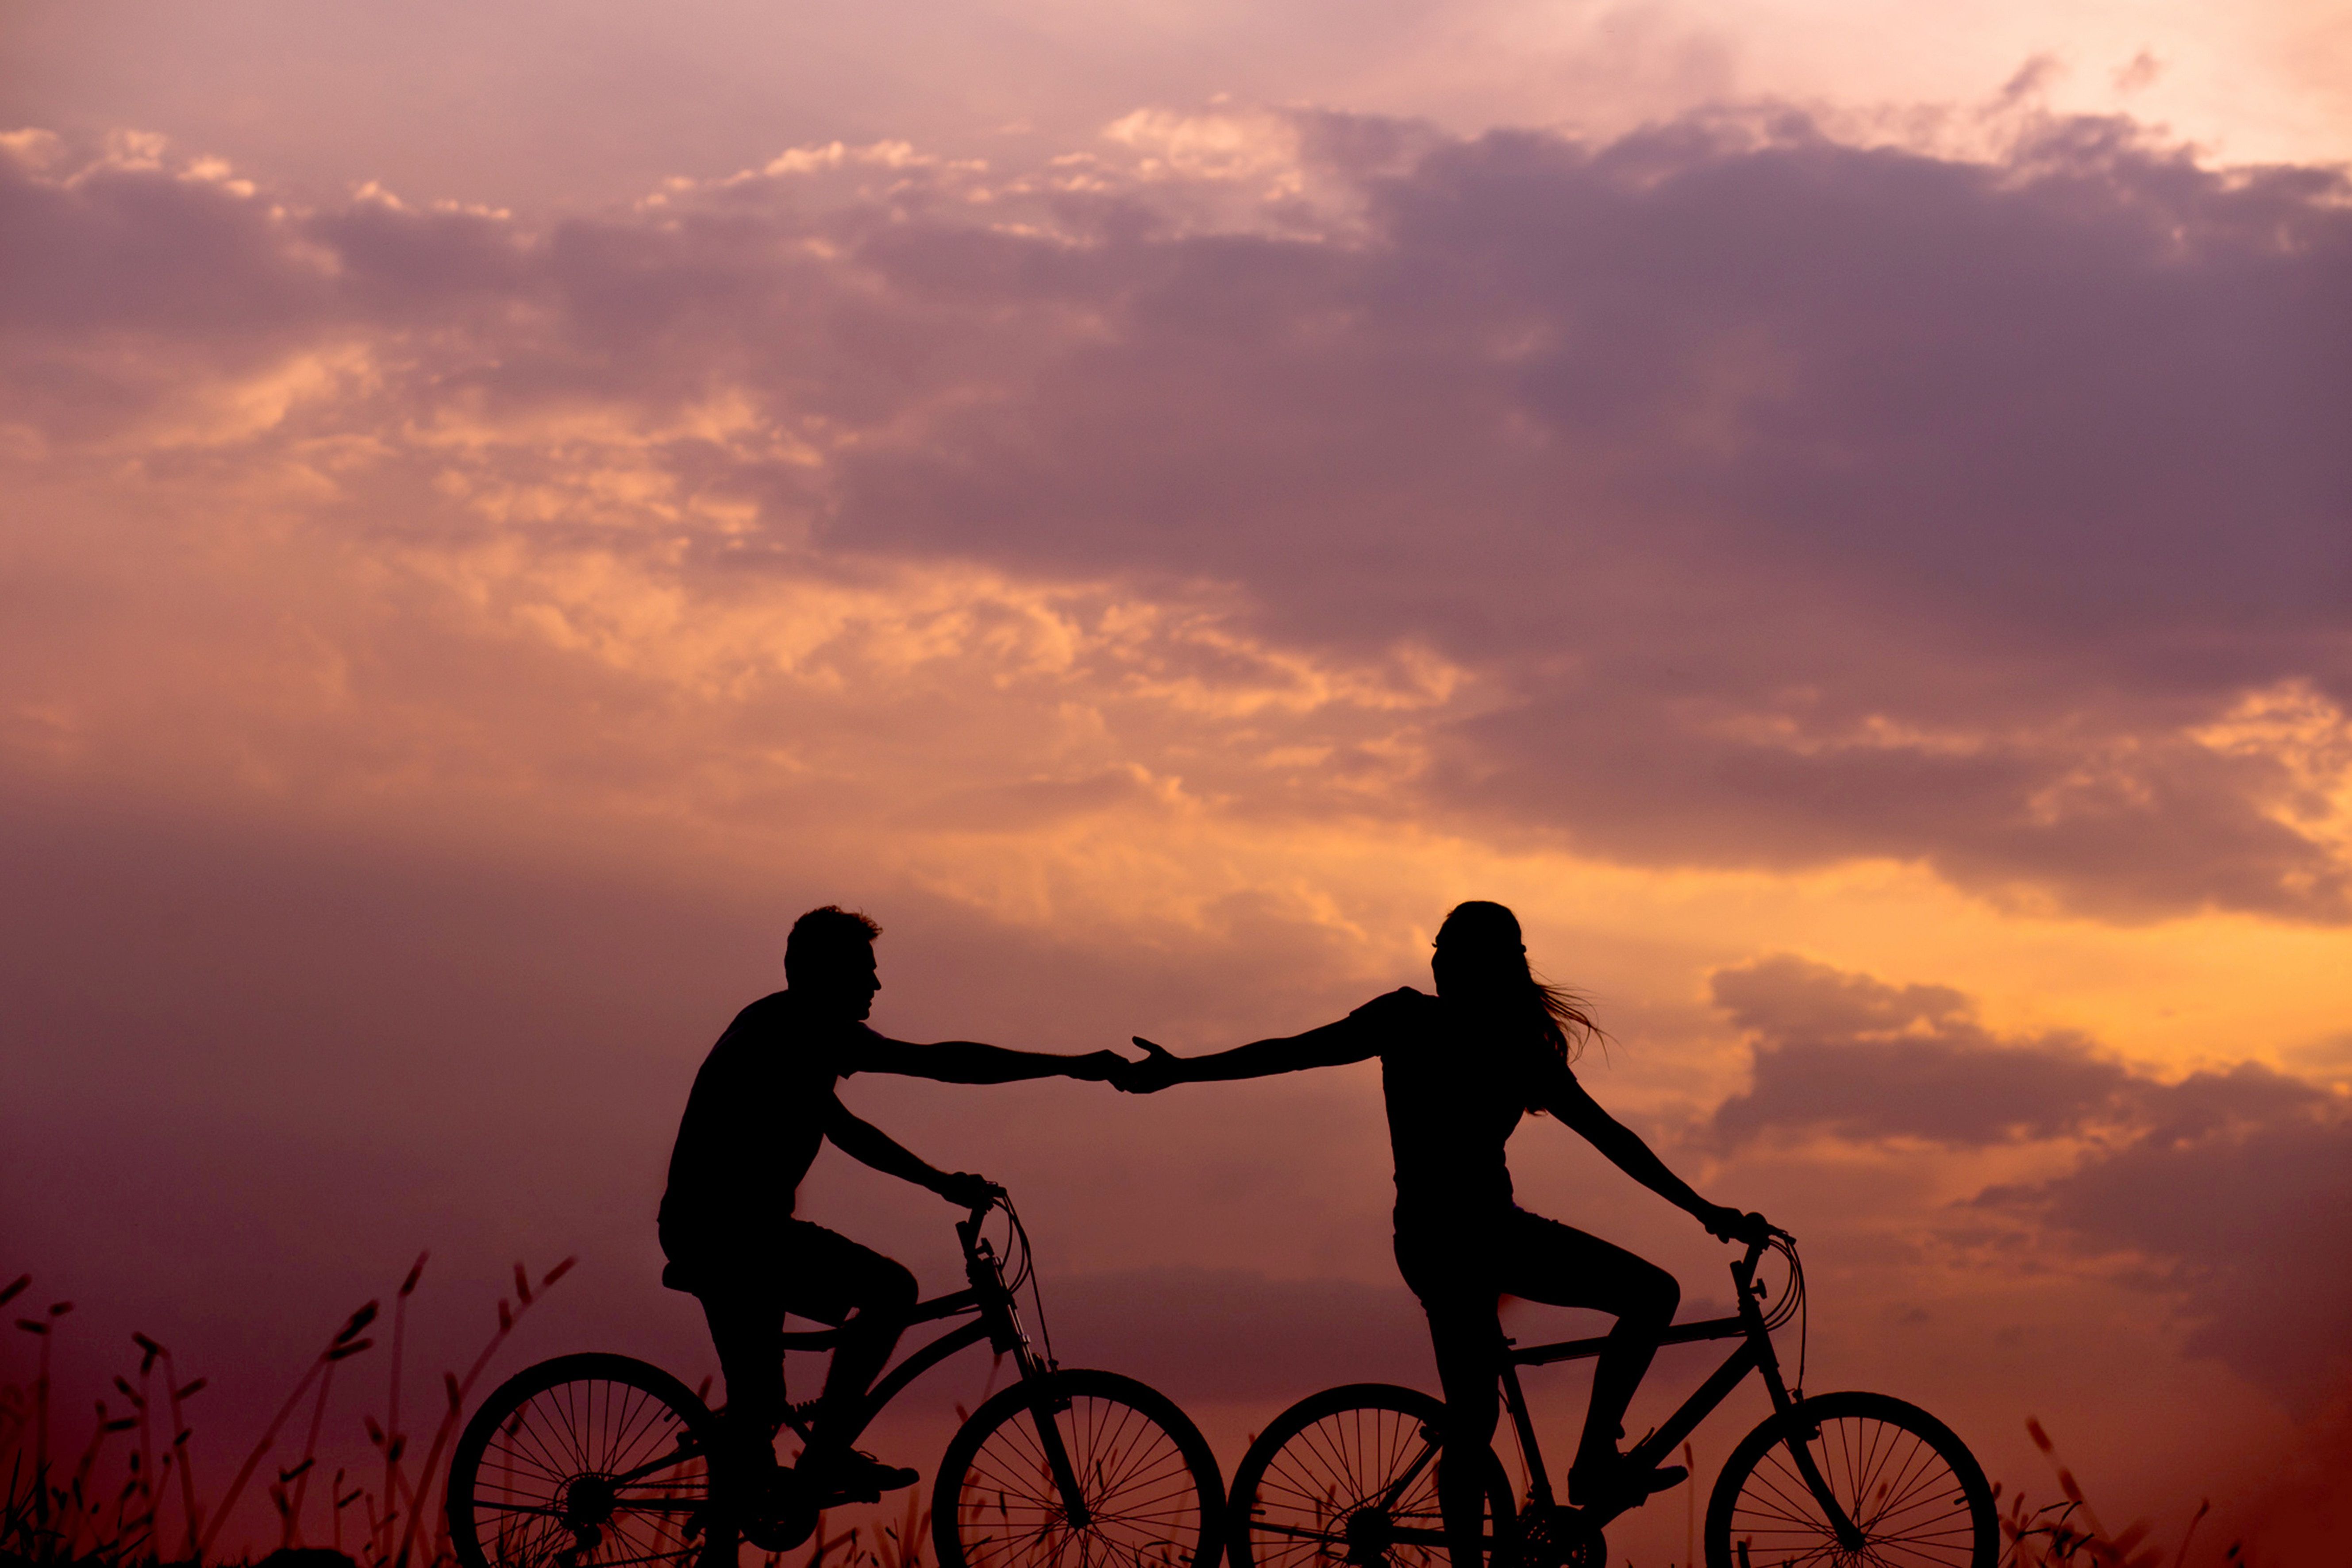 5315x3543 #orange, #people wallpaper, #touch, #romance, #pedal, # bicycle, #spoke, #love, #frame, #bike, #Free picture, #people background, #wallpaper, #couple, #hold, #man, #hand, #silhouette, #riding, #woman, # cycle